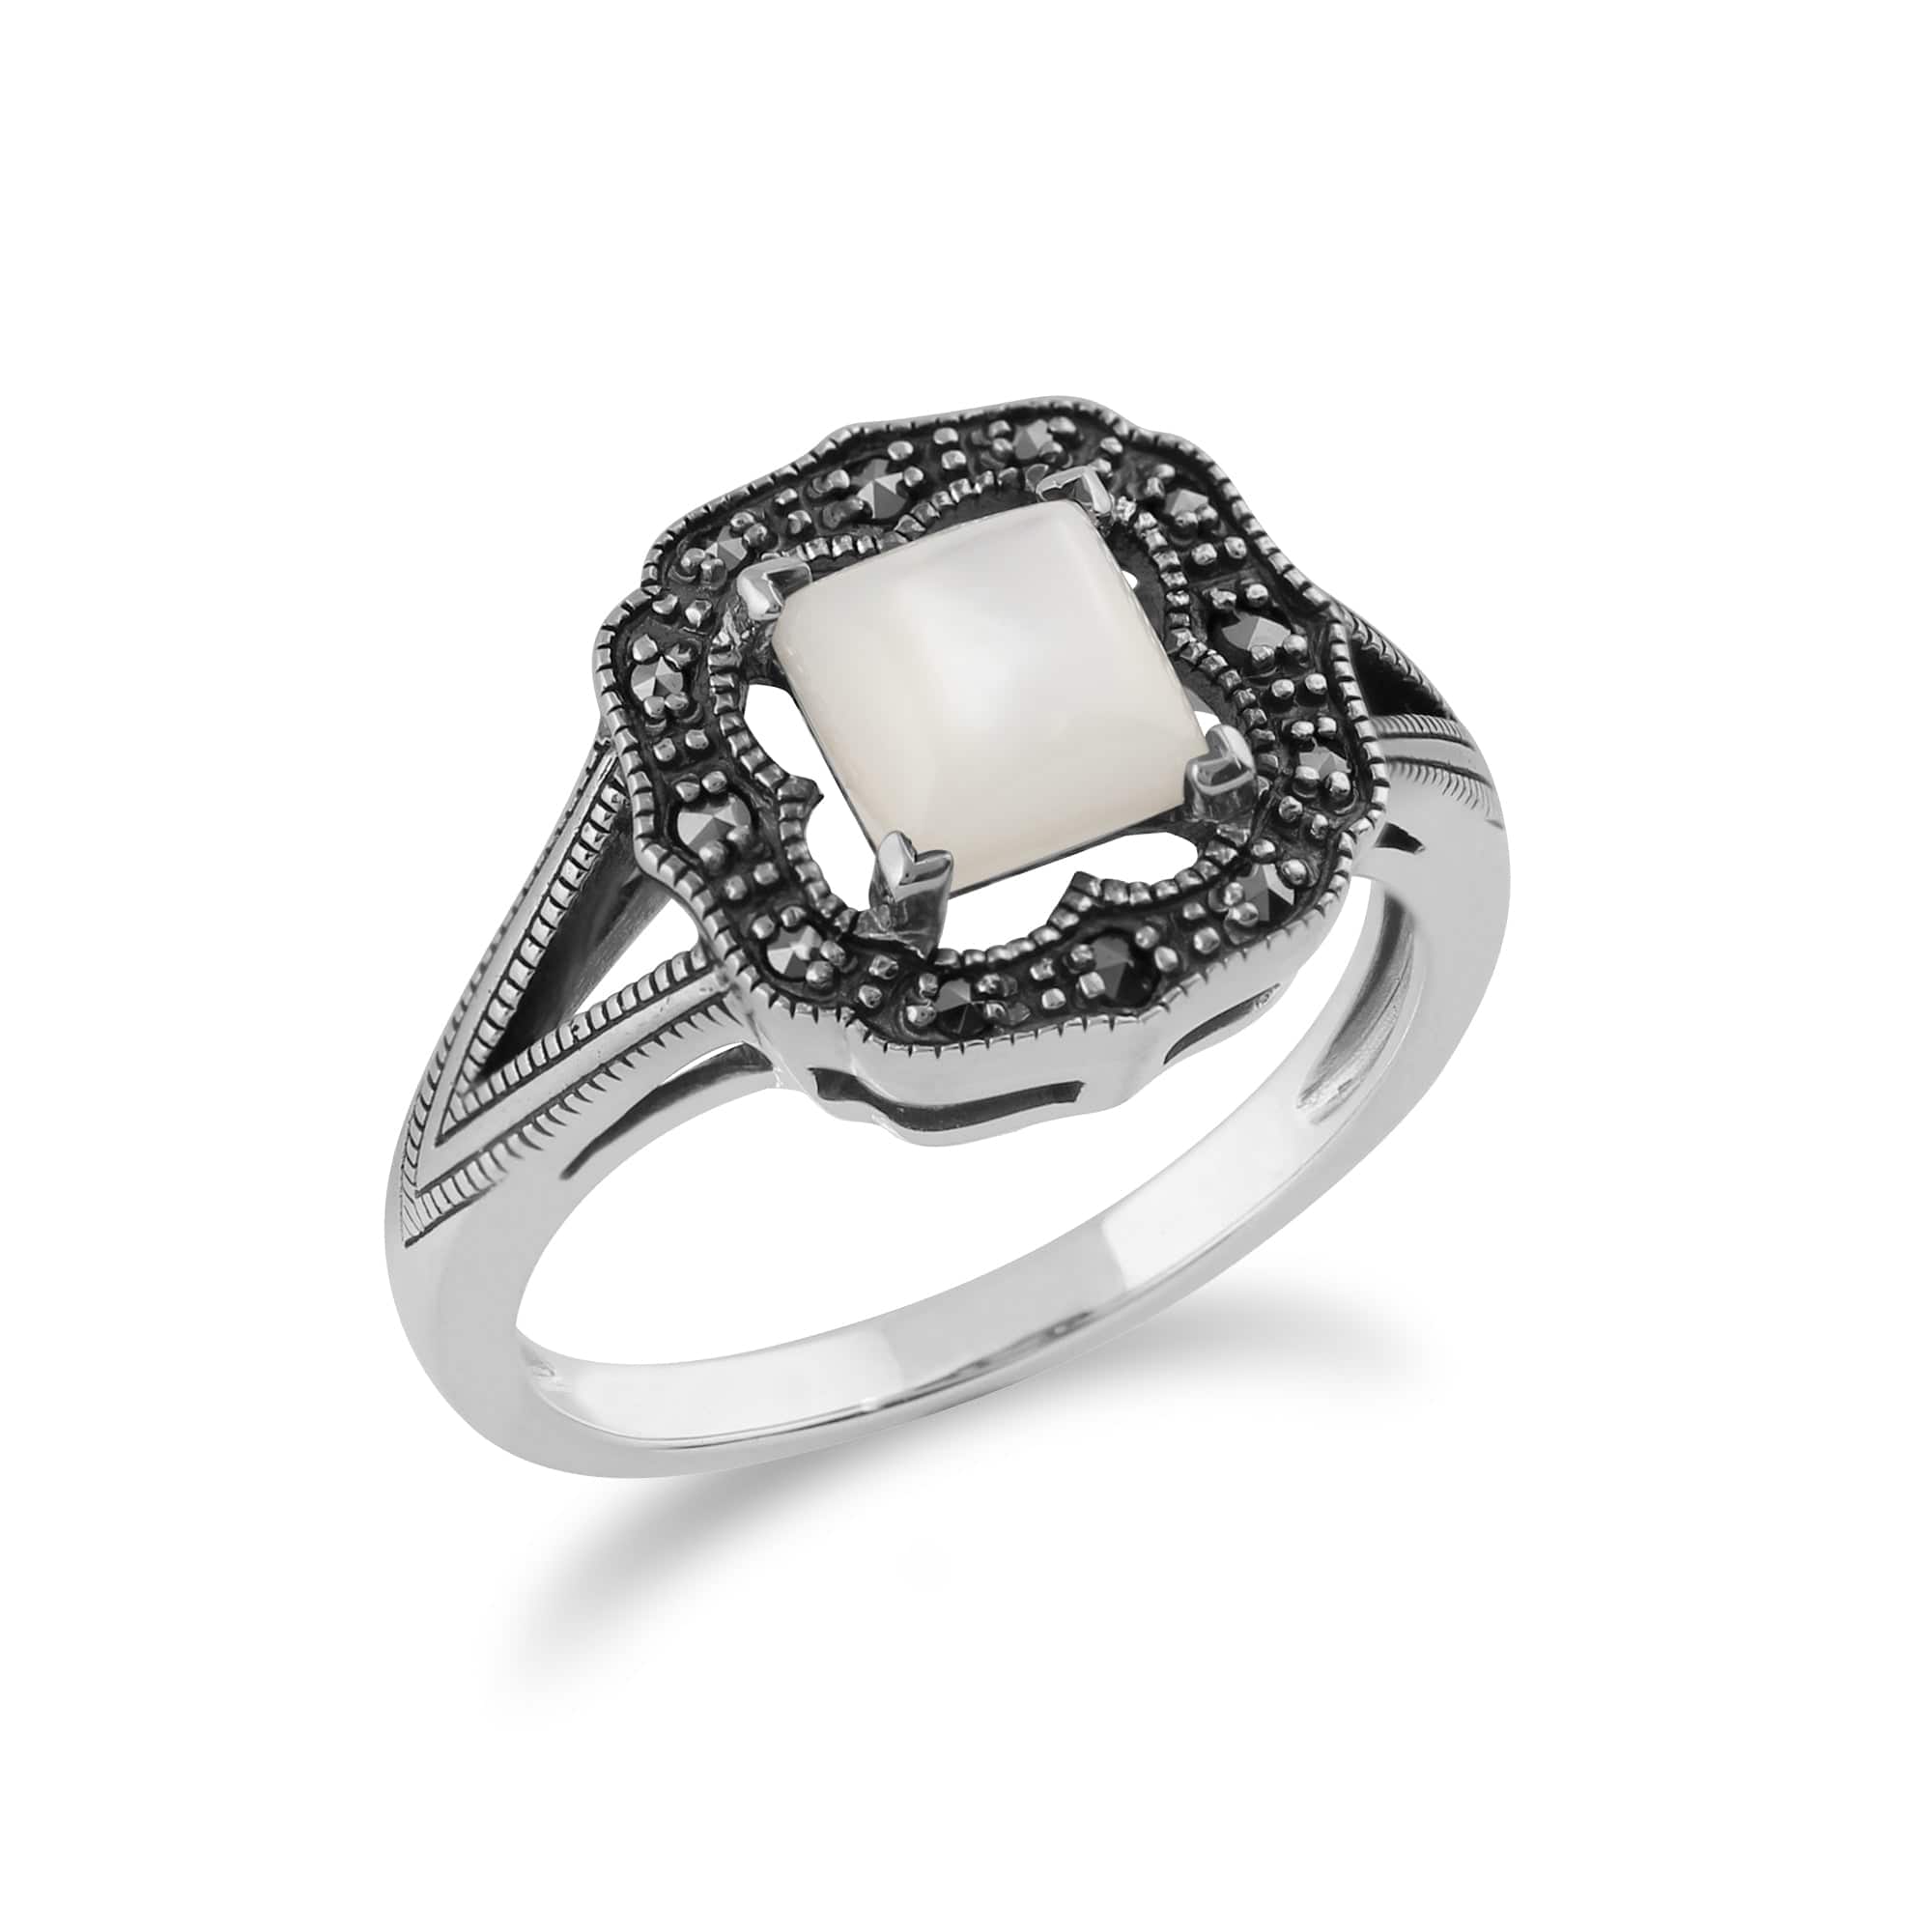 Gemondo 925 Sterling Silver 0.58ct Mother of Pearl & Marcasite Art Deco Ring Image 2